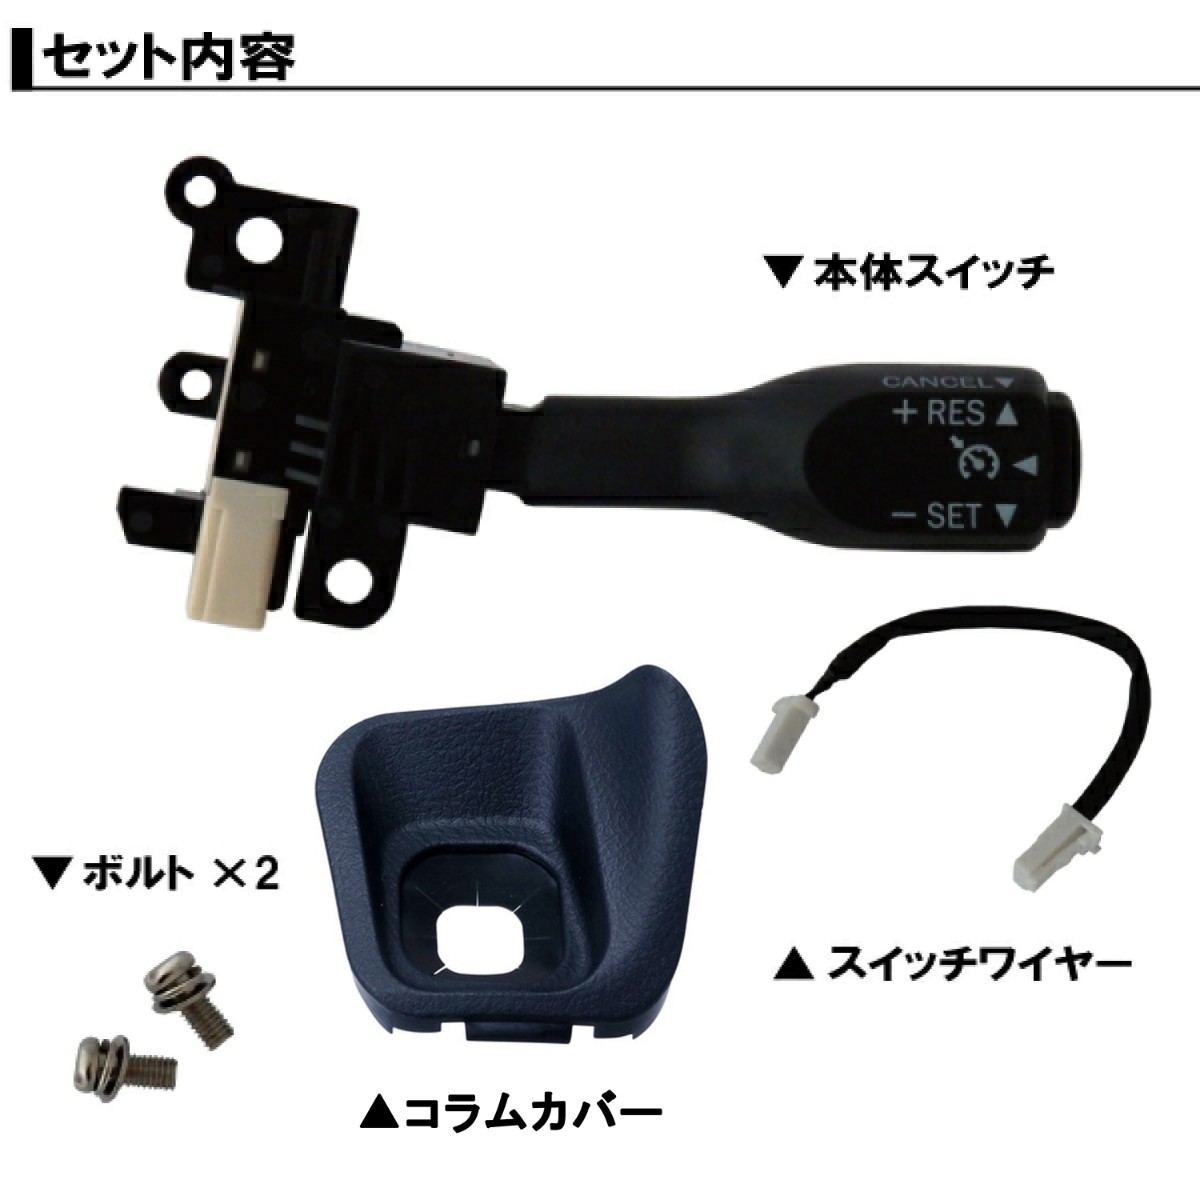  air conditioner attached after Hiace 200 series cruise control post-putting kit 